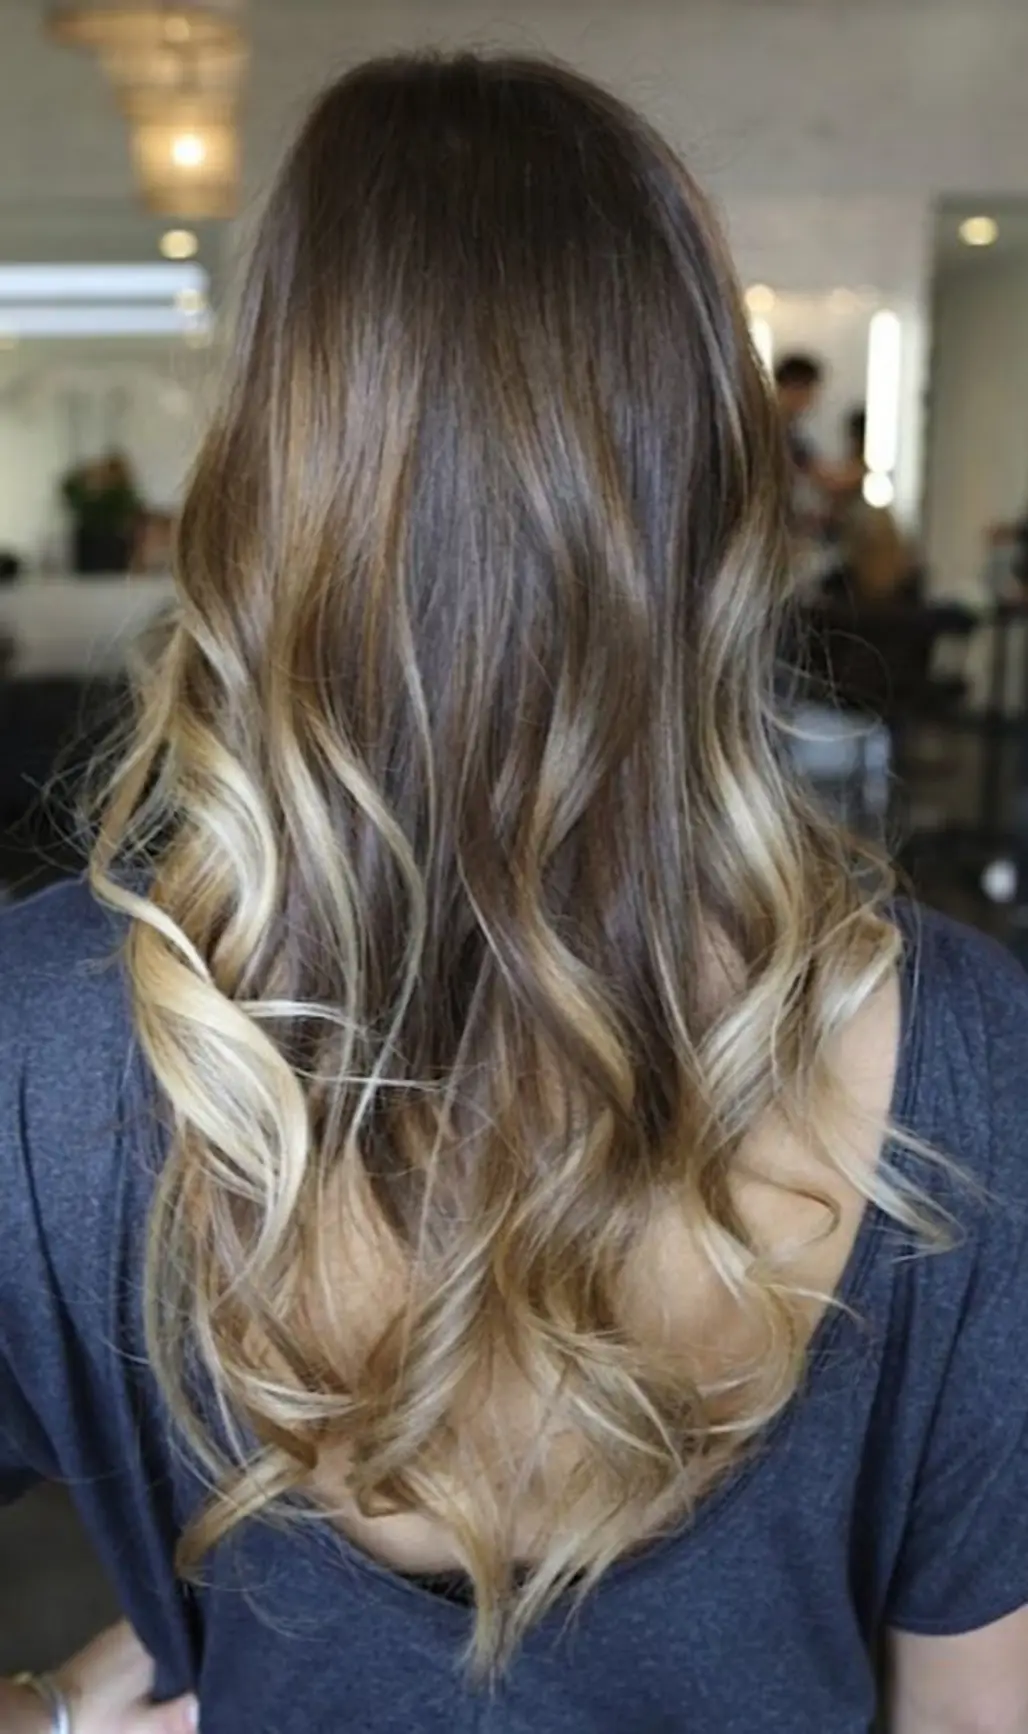 You Love the Look of Mixed Color in Your Hair